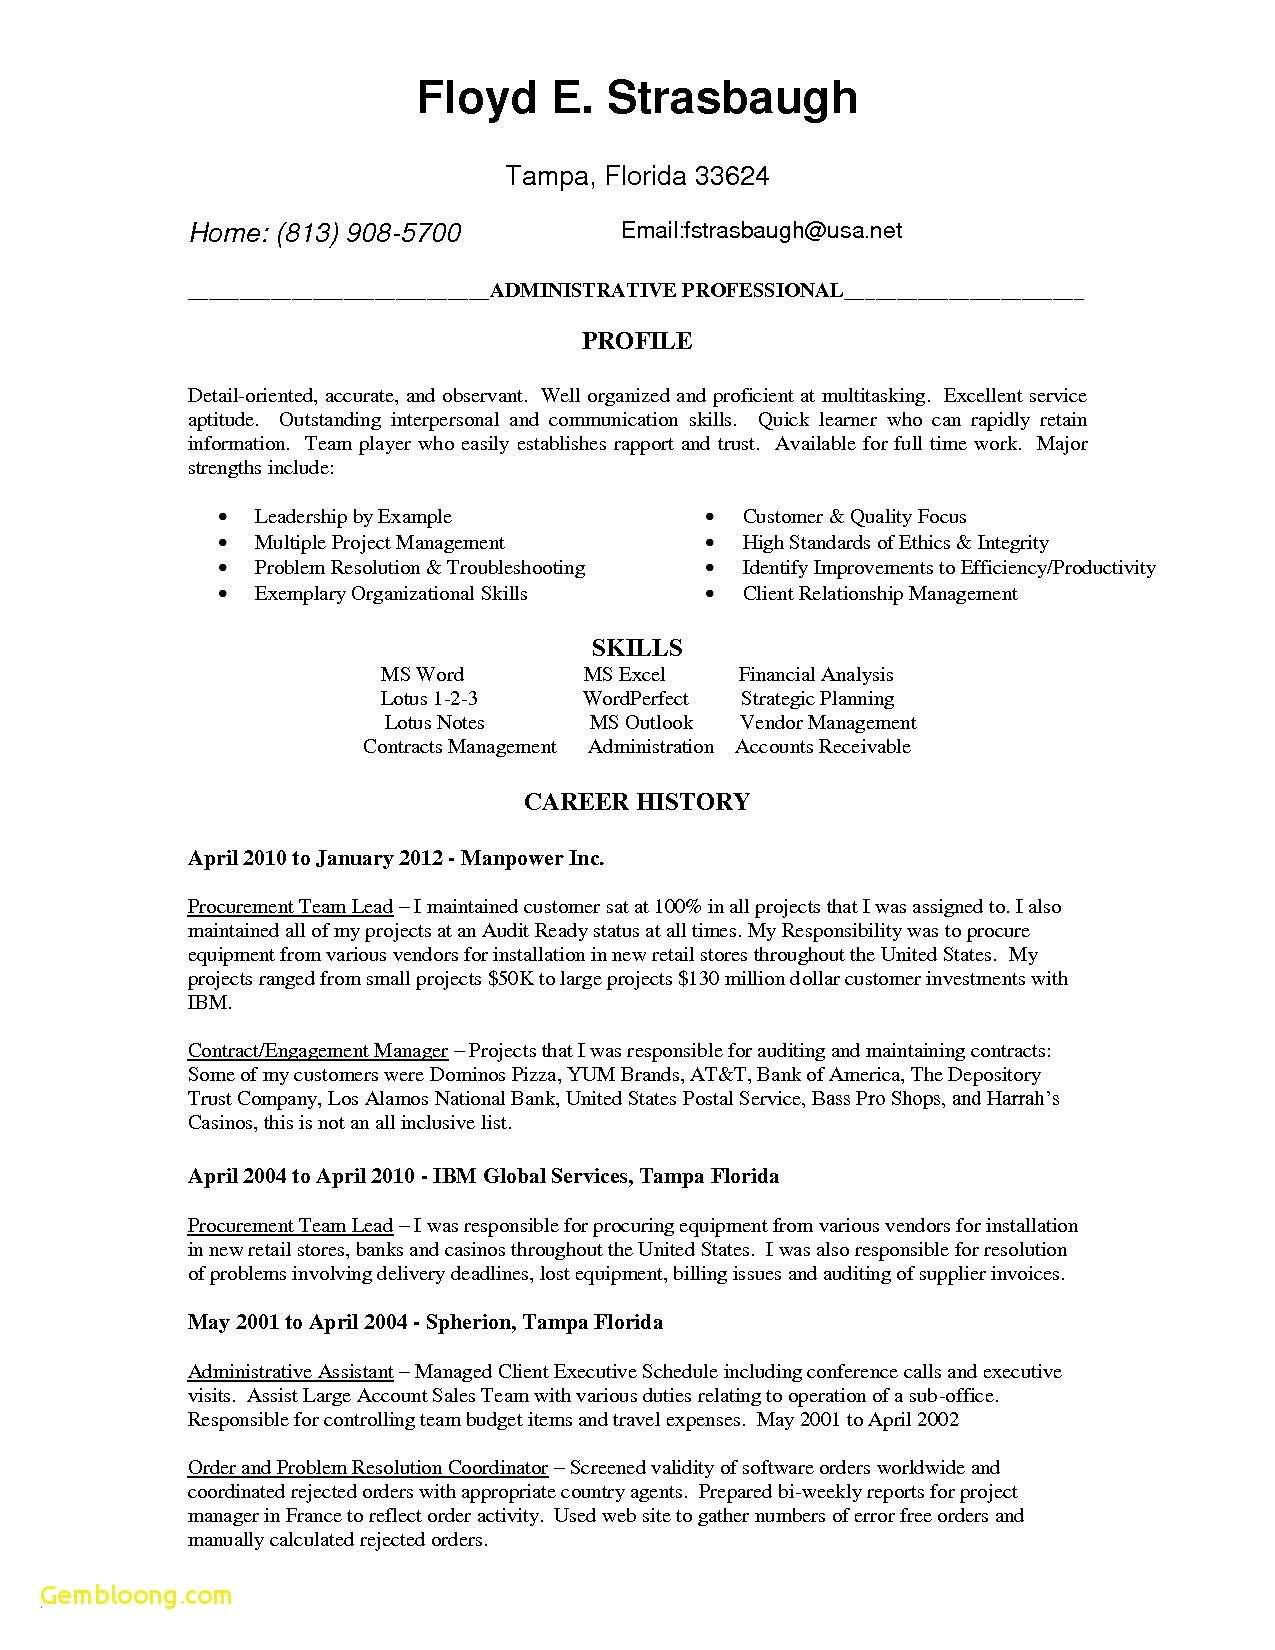 Cover Letter Template Microsoft Word 2010 - Microsoft Word 2010 Resume Template Legalsocialmobilitypartnership